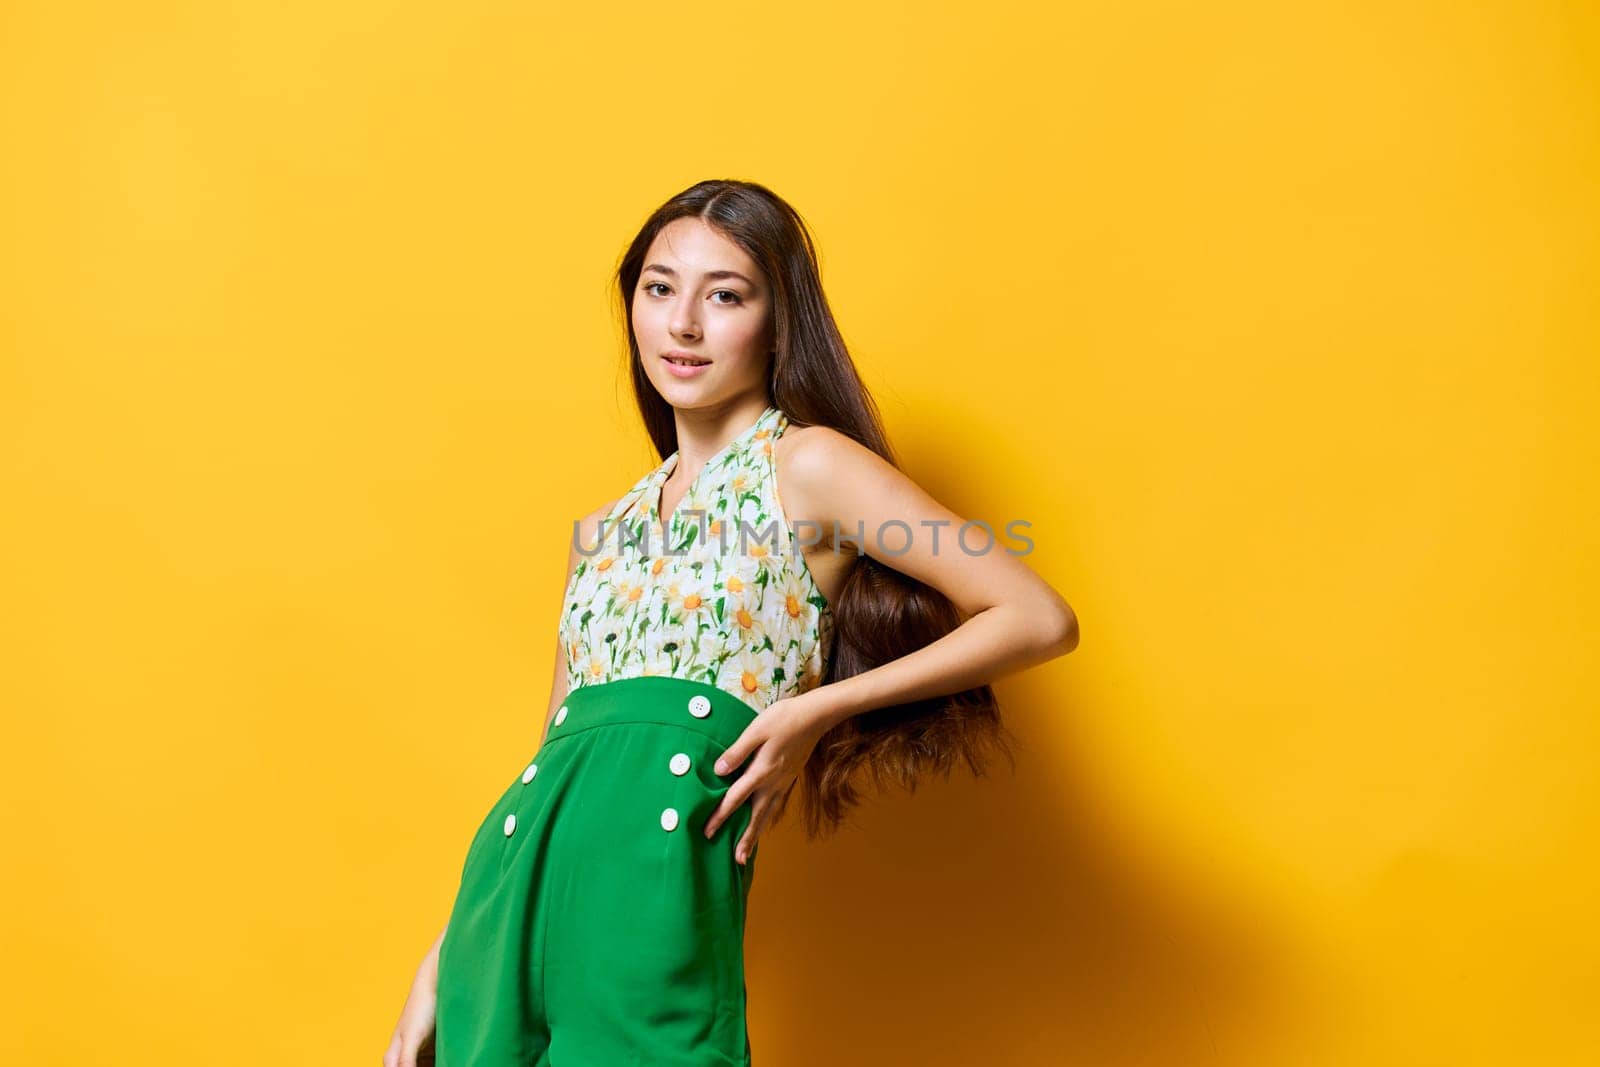 woman beautiful emotion young fashion happy stylish style face trendy yellow by SHOTPRIME